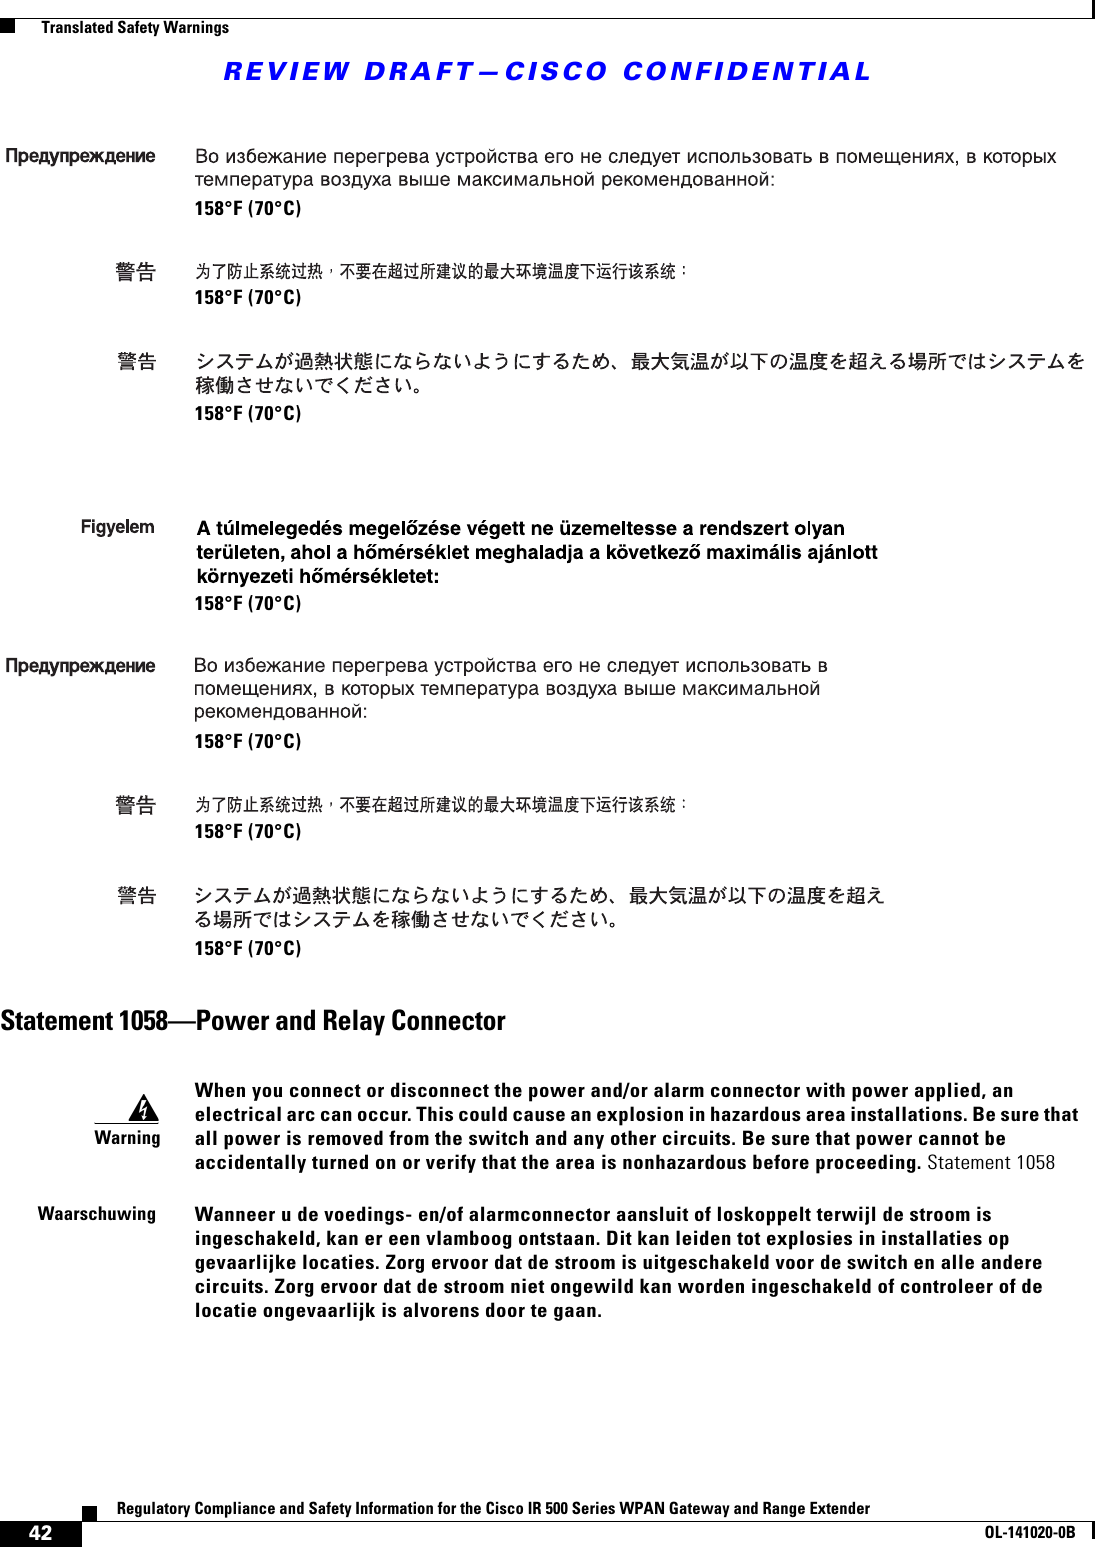 REVIEW DRAFT—CISCO CONFIDENTIAL42Regulatory Compliance and Safety Information for the Cisco IR 500 Series WPAN Gateway and Range ExtenderOL-141020-0B  Translated Safety WarningsStatement 1058—Power and Relay Connector158°F (70°C)158°F (70°C)158°F (70°C)158°F (70°C)158°F (70°C)158°F (70°C)158°F (70°C)WarningWhen you connect or disconnect the power and/or alarm connector with power applied, an electrical arc can occur. This could cause an explosion in hazardous area installations. Be sure that all power is removed from the switch and any other circuits. Be sure that power cannot be accidentally turned on or verify that the area is nonhazardous before proceeding. Statement 1058WaarschuwingWanneer u de voedings- en/of alarmconnector aansluit of loskoppelt terwijl de stroom is ingeschakeld, kan er een vlamboog ontstaan. Dit kan leiden tot explosies in installaties op gevaarlijke locaties. Zorg ervoor dat de stroom is uitgeschakeld voor de switch en alle andere circuits. Zorg ervoor dat de stroom niet ongewild kan worden ingeschakeld of controleer of de locatie ongevaarlijk is alvorens door te gaan.